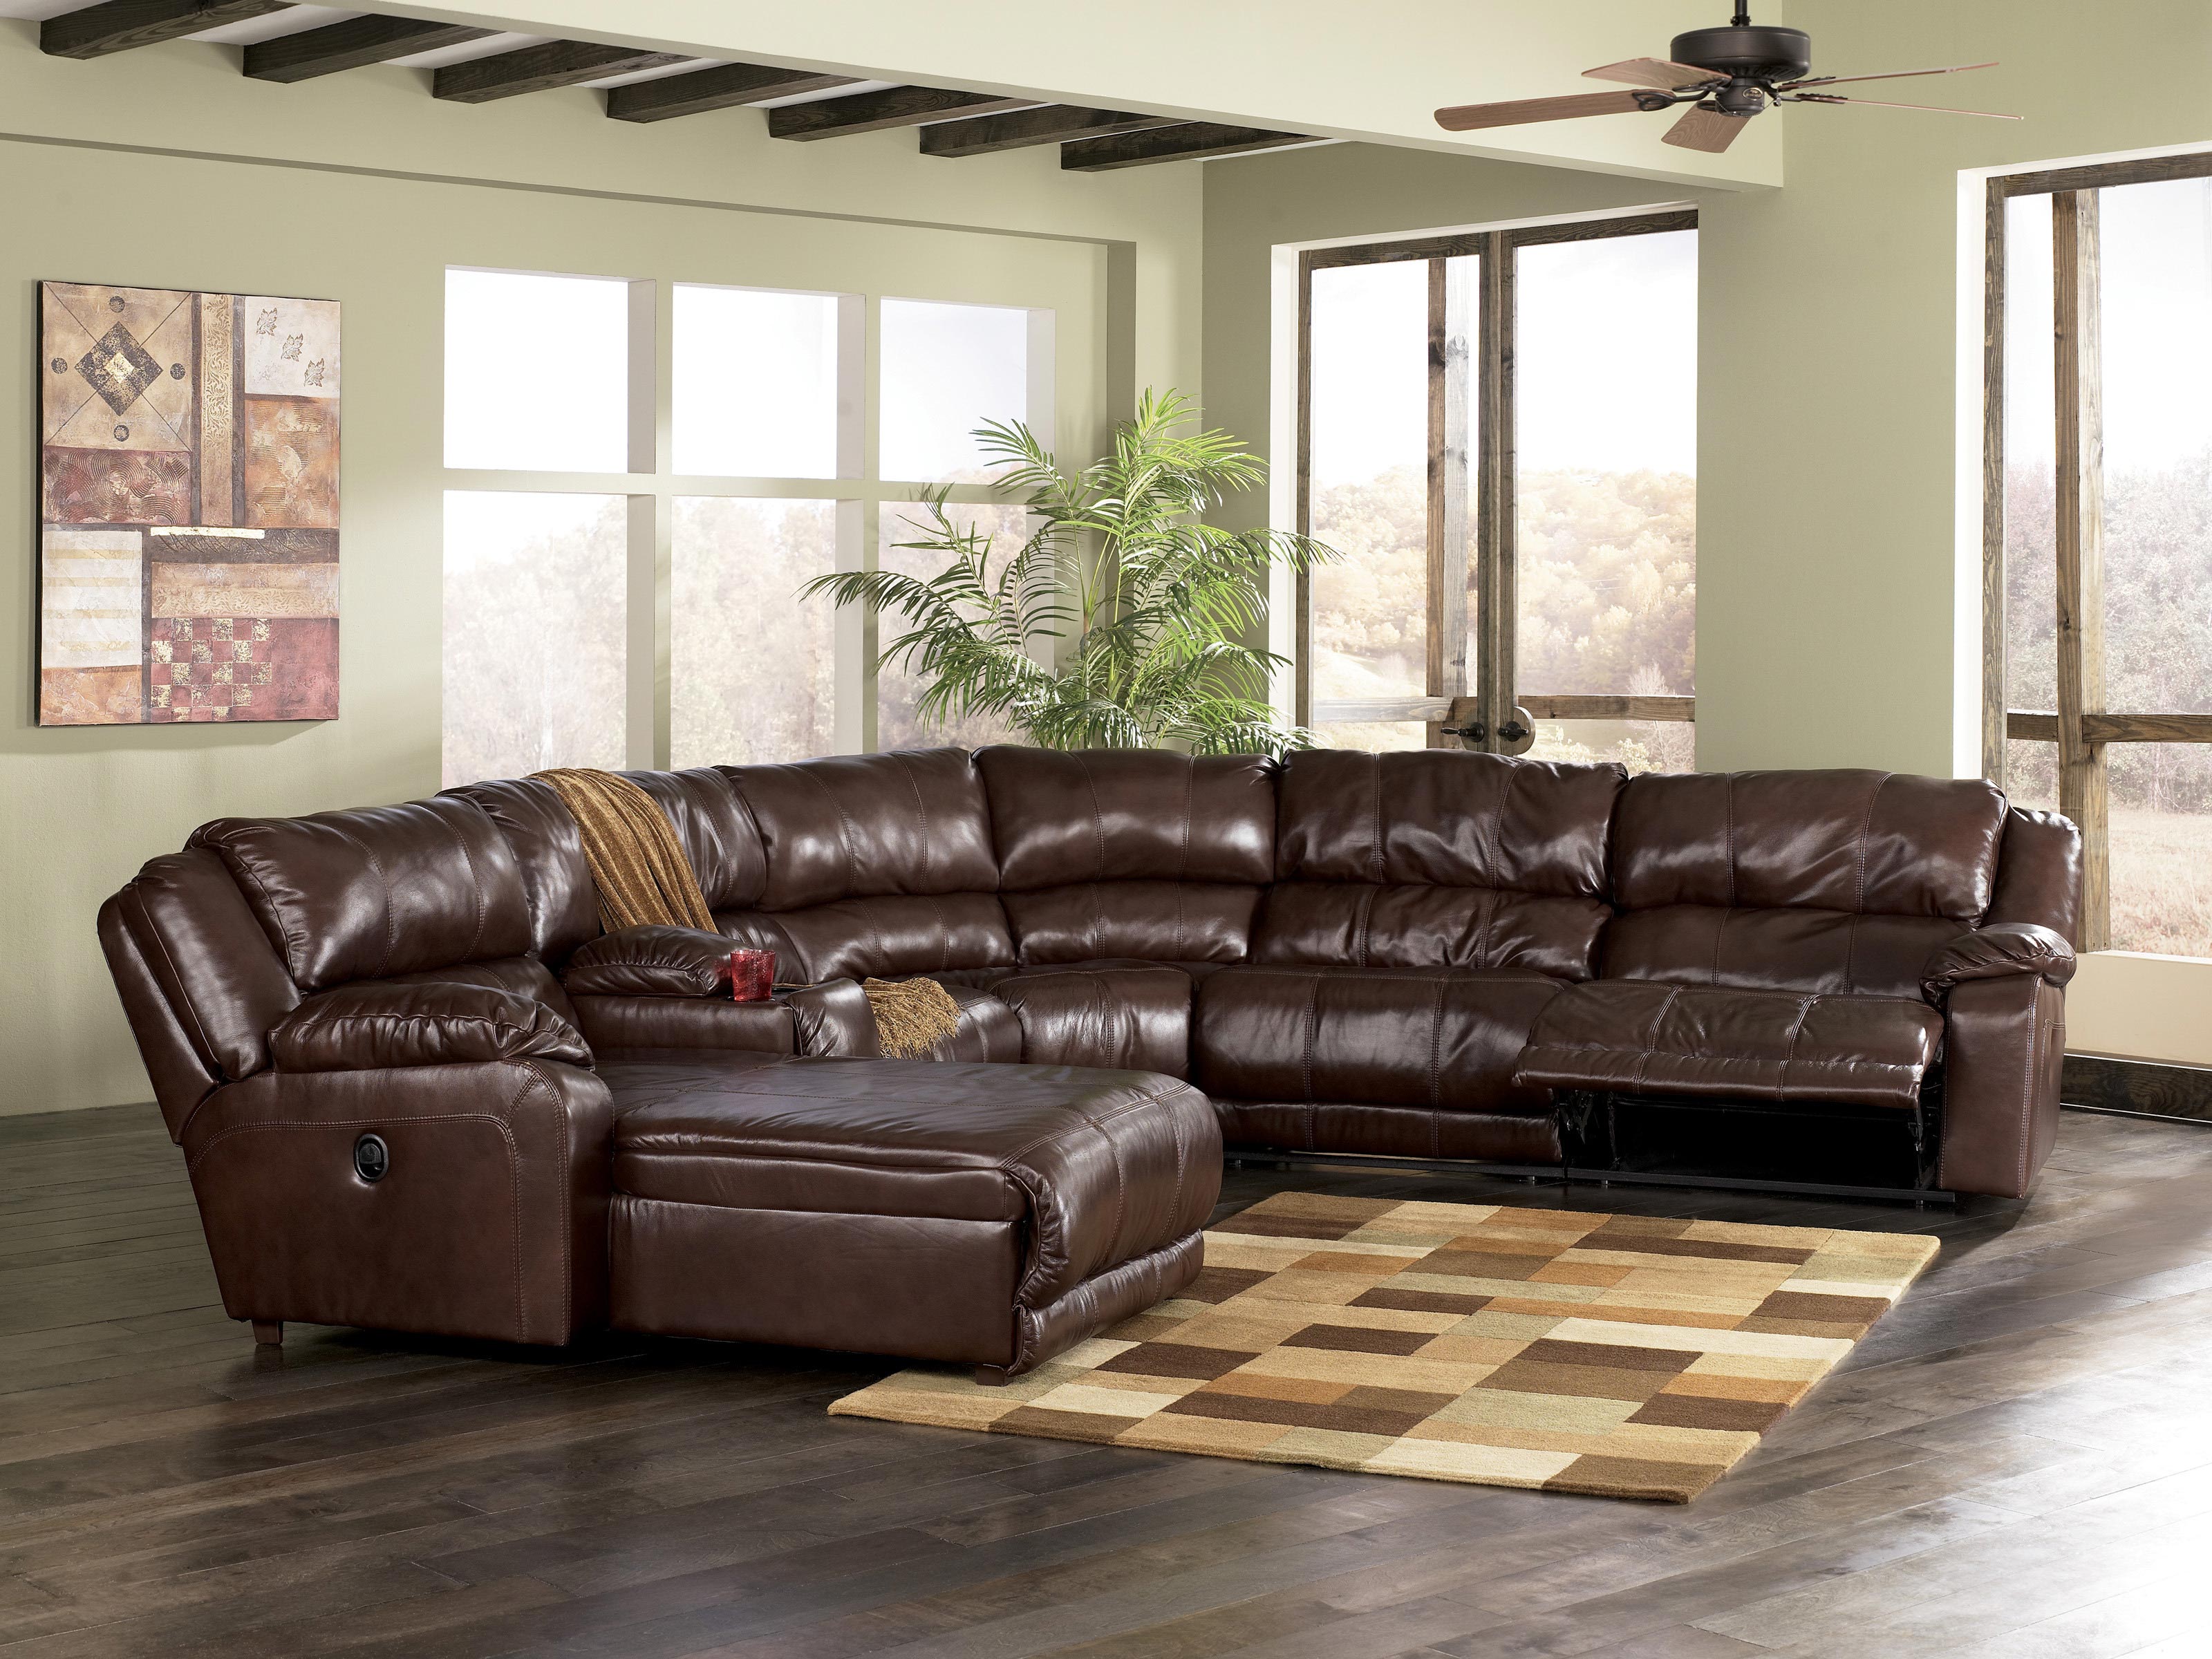 Living Room Design With Modern Leather Sectional